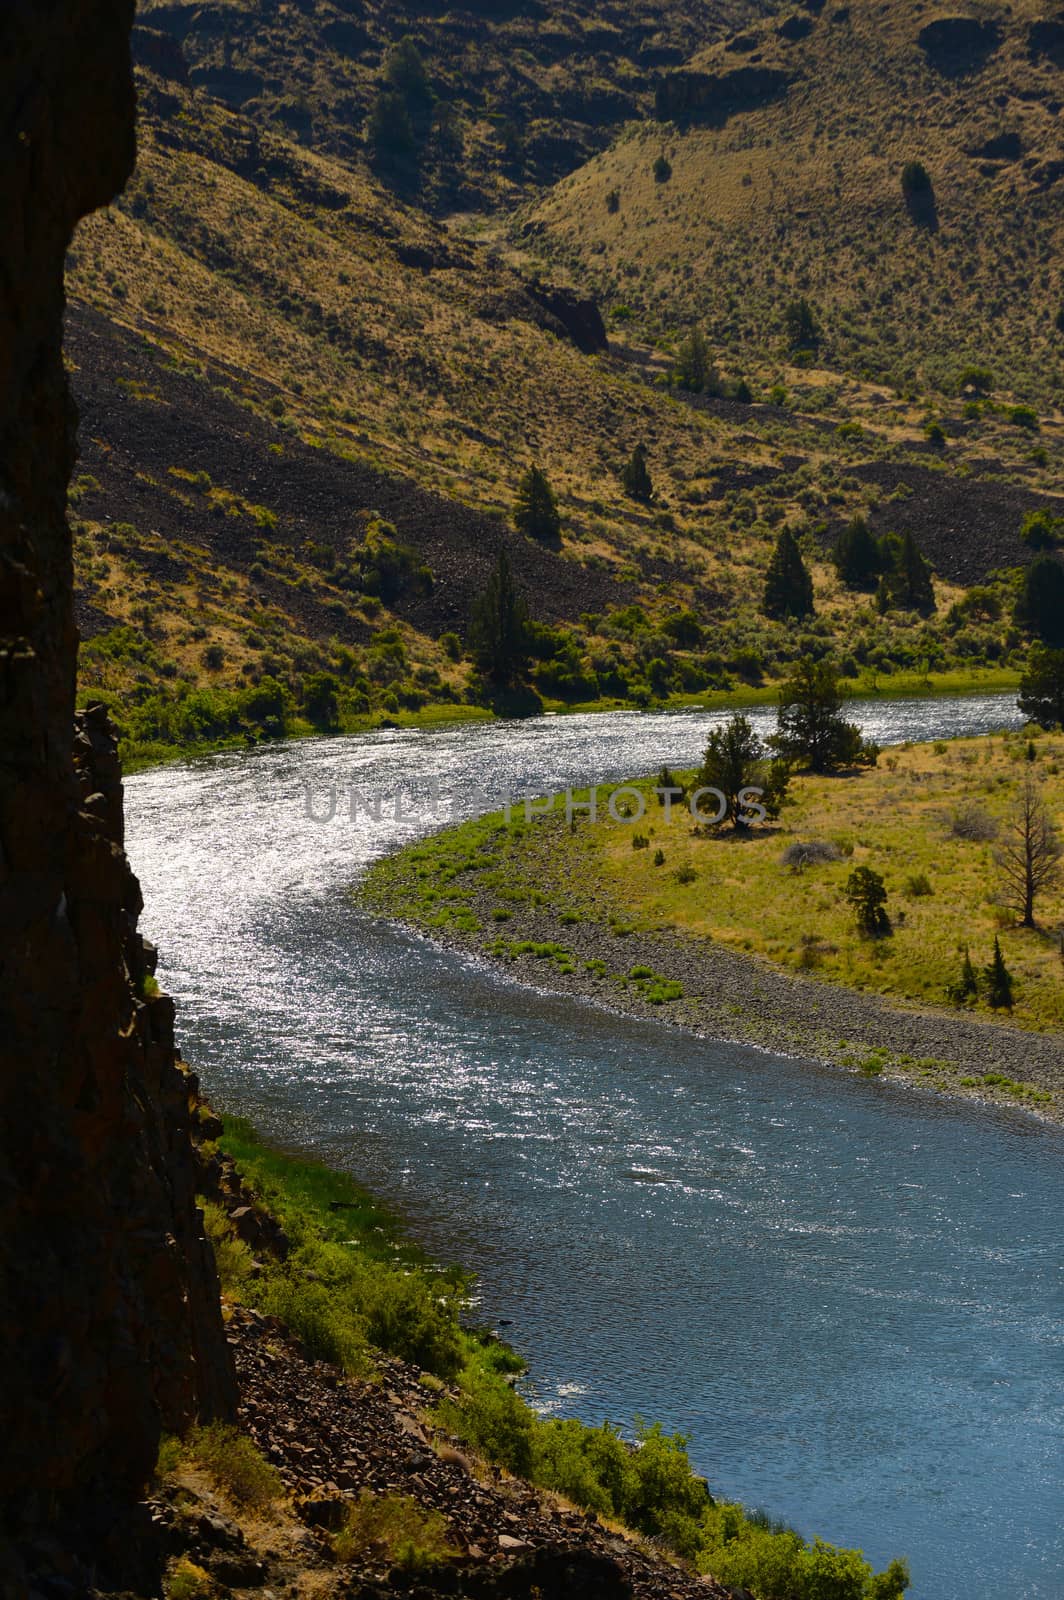 Landscape river background with mountains, river, trees in a beautiful natural setting in Oregon